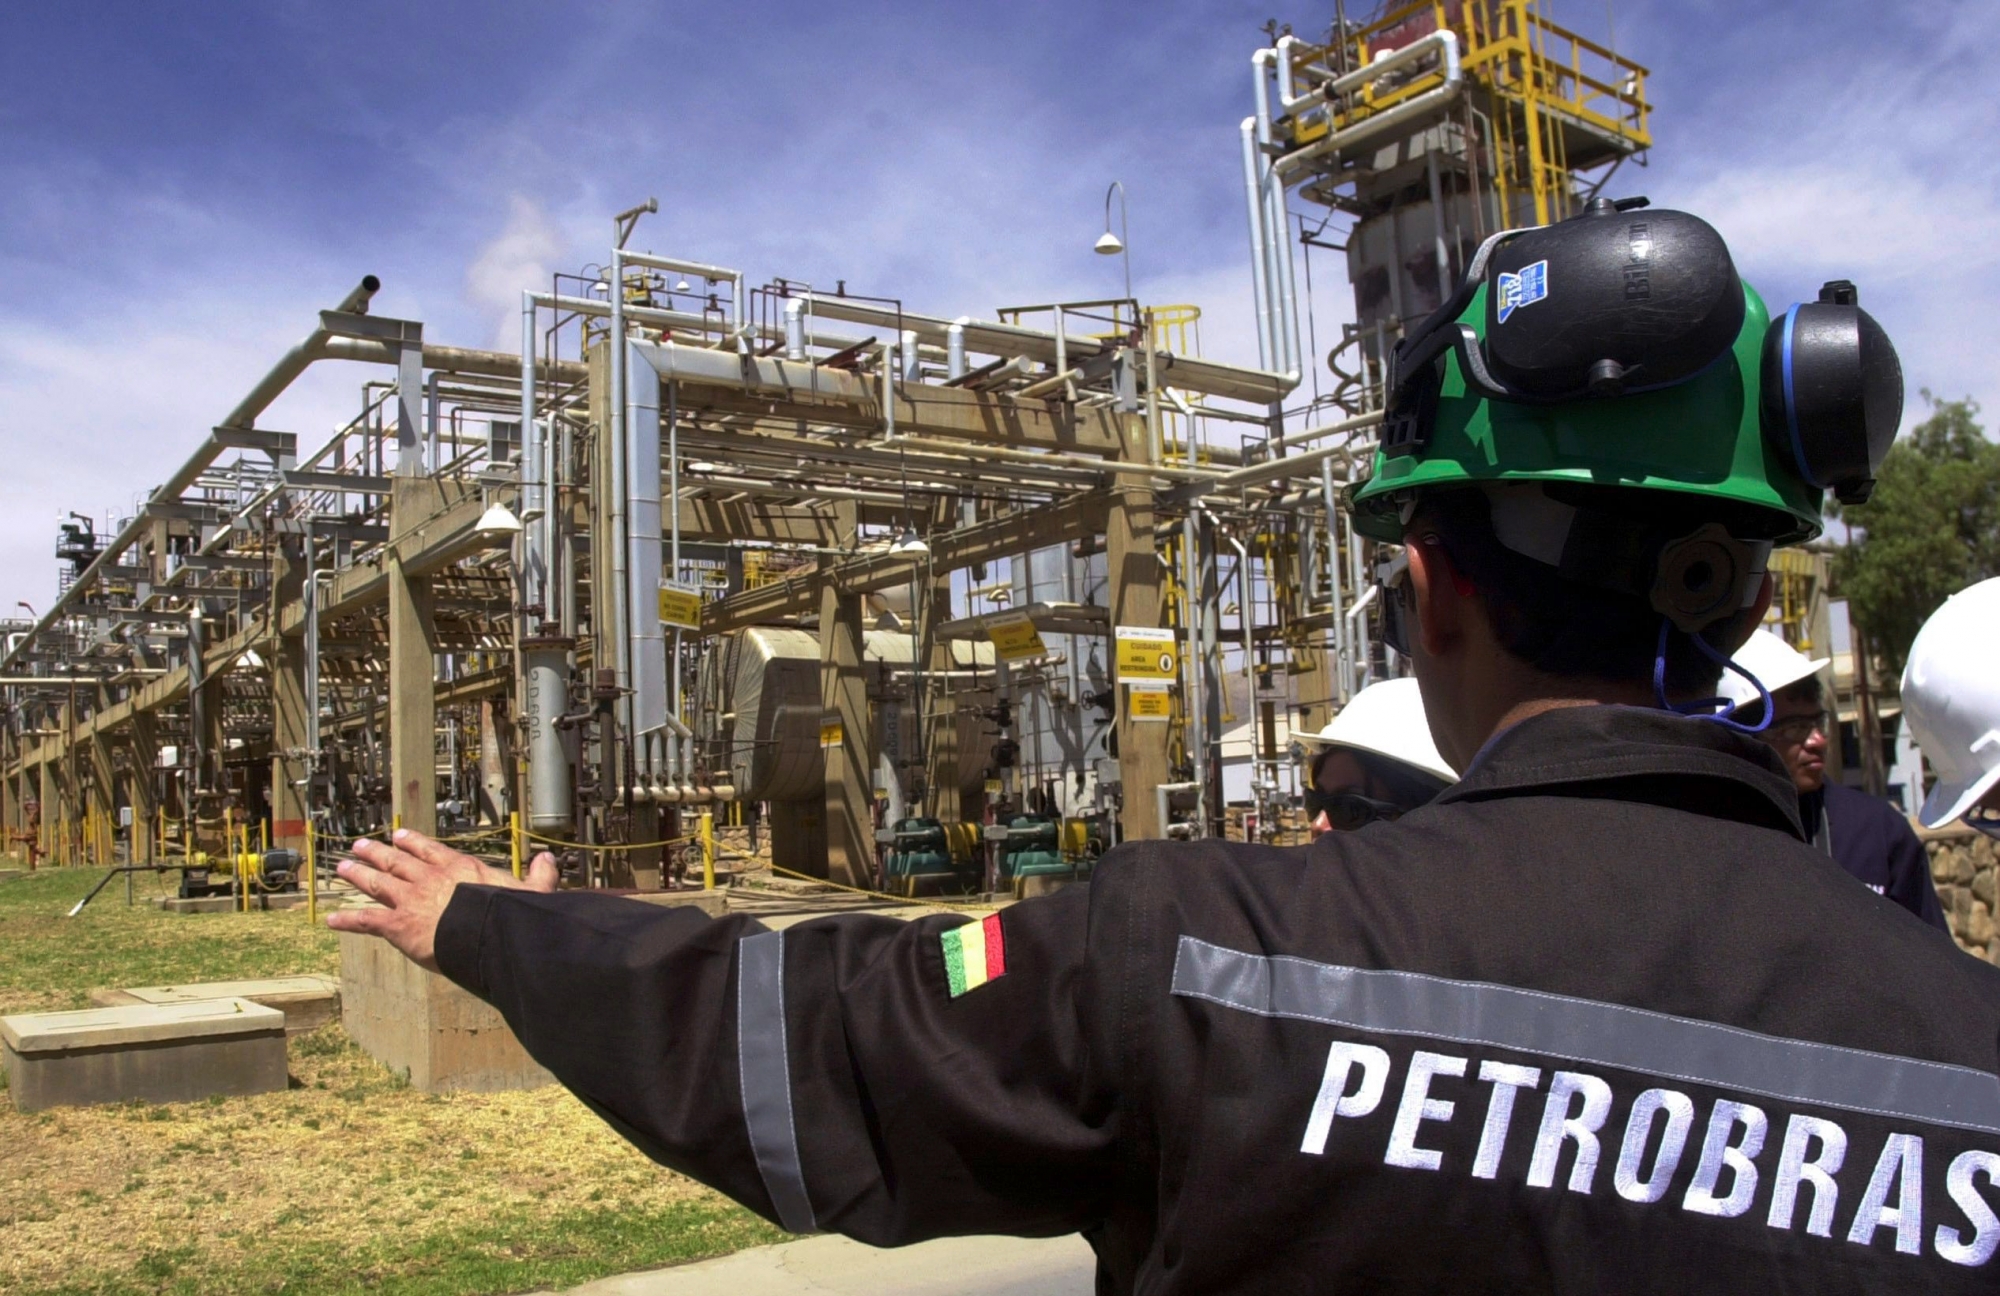 A Bolivian employee of Brazil's oil giant Petrobras subsidiary Petrobras Bolivia  shows a natural gas facility at the Gualberto Villarroel , 8m (about 5 miles) south of Cochabamba, Bolivia, Tuesday, Sept. 5, 2006. The nationalization of Bolivia's hydrocarbons industry took two steps forward this week as the government opened long-awaited contract negotiations with foreign petroleum companies while collecting the first round of higher royalties it now charges those firms. Representatives of the French company Total S.A. sat down with Hydrocarbons Ministry officials Tuesday in La Paz to begin drawing up a new contract ceding a majority share of their Bolivian operations to the government, as required by President Evo Morales' May 1 nationalization decree. Contract negotiations with other international firms _ including Brazil's state-owned Petrobras and the Spanish-Argentine firm Repsol YPF _ are expected to follow.(AP Photo/Nano Cartagena) BOLIVIEN WIRTSCHAFT INDUSTRIE